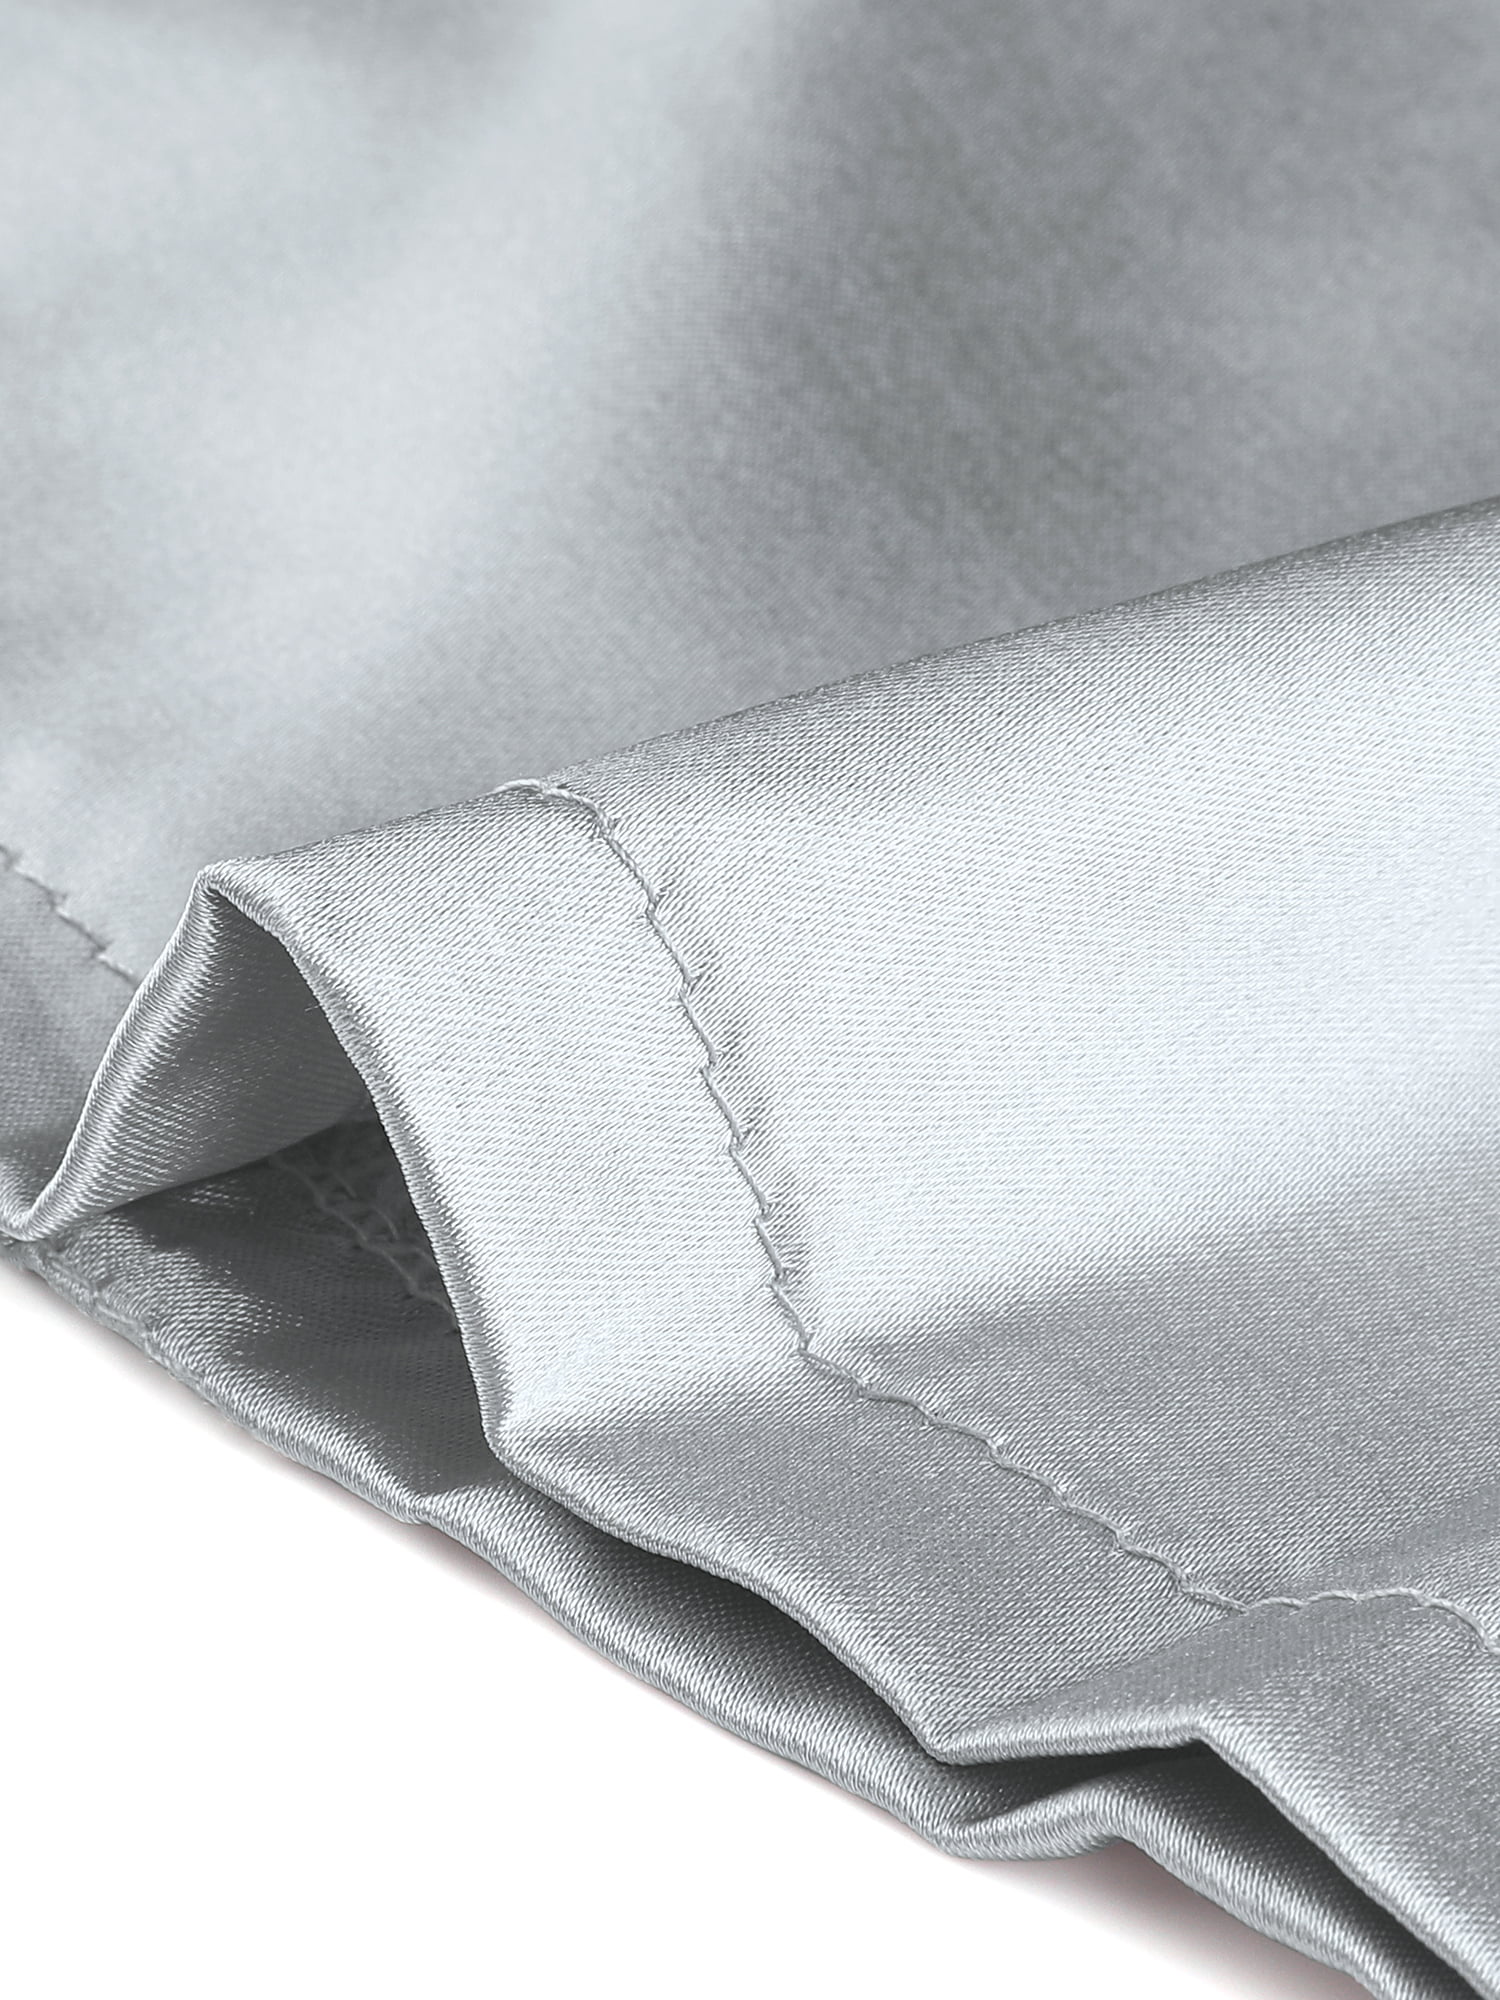 100% Silk Silver Grey Color 19mm Silk Satin Fabric for Dress Shirts,  Pajamas, Evening Dress, DIY Handmade, Sell by the Yard, Made in China 